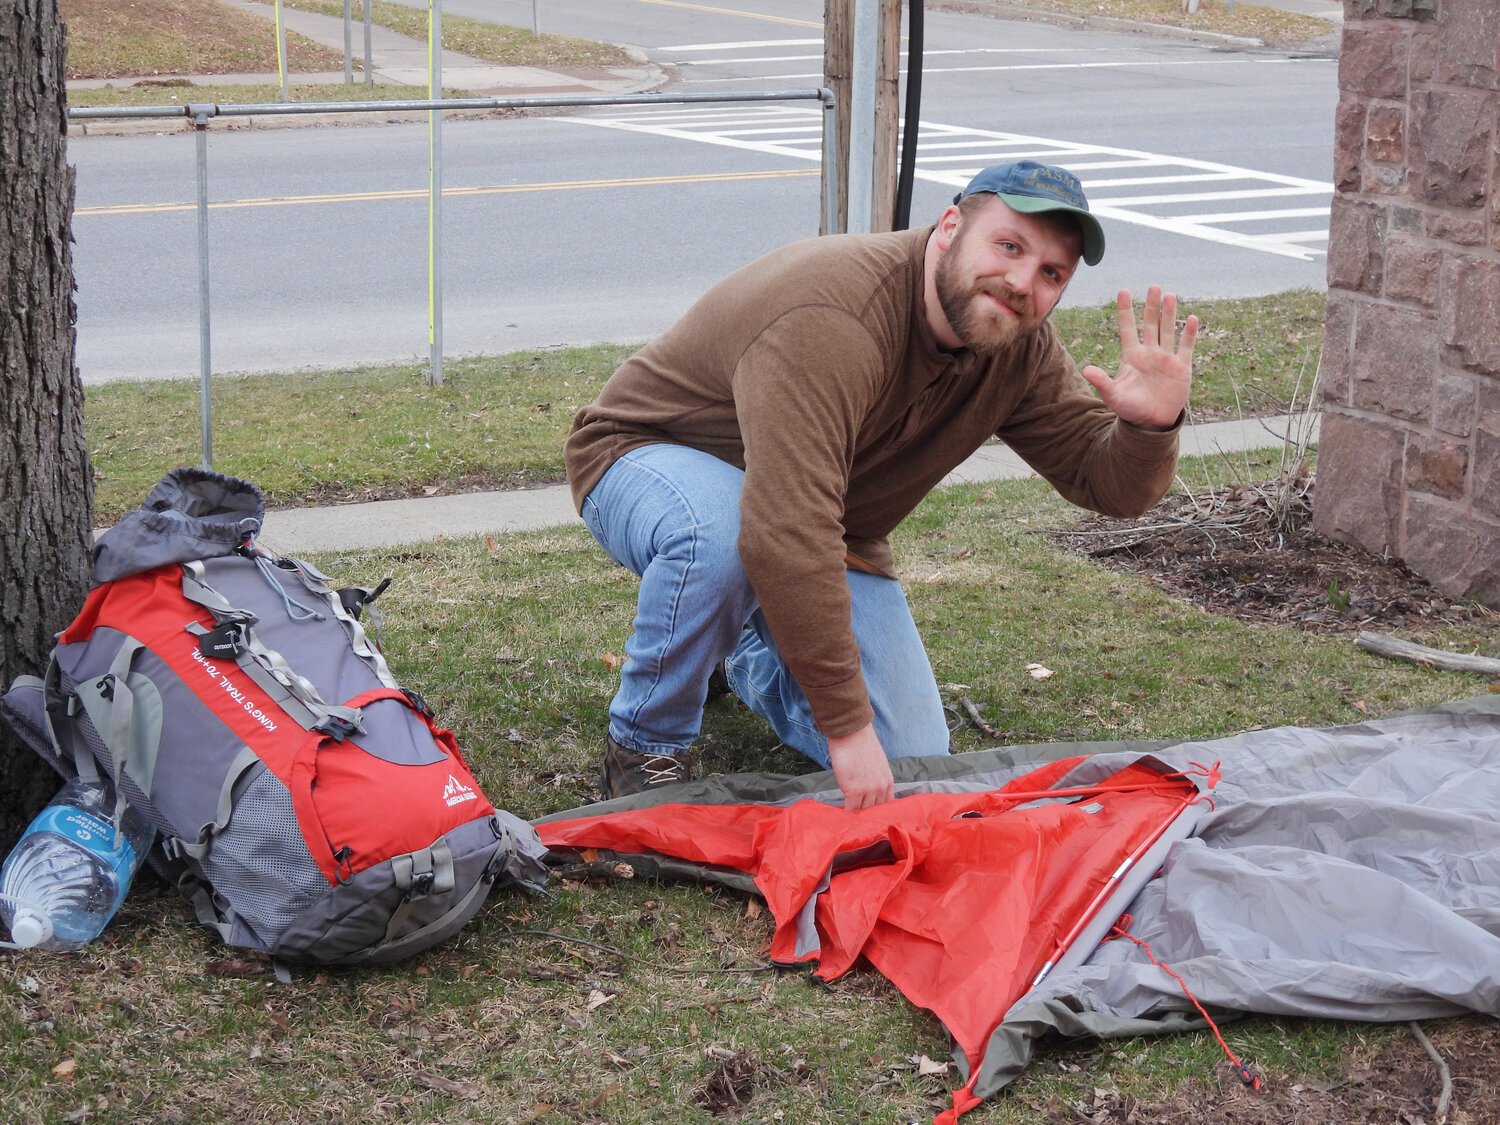 Keegan Richie works to set up his tent for the homelessness awareness sleep-out.